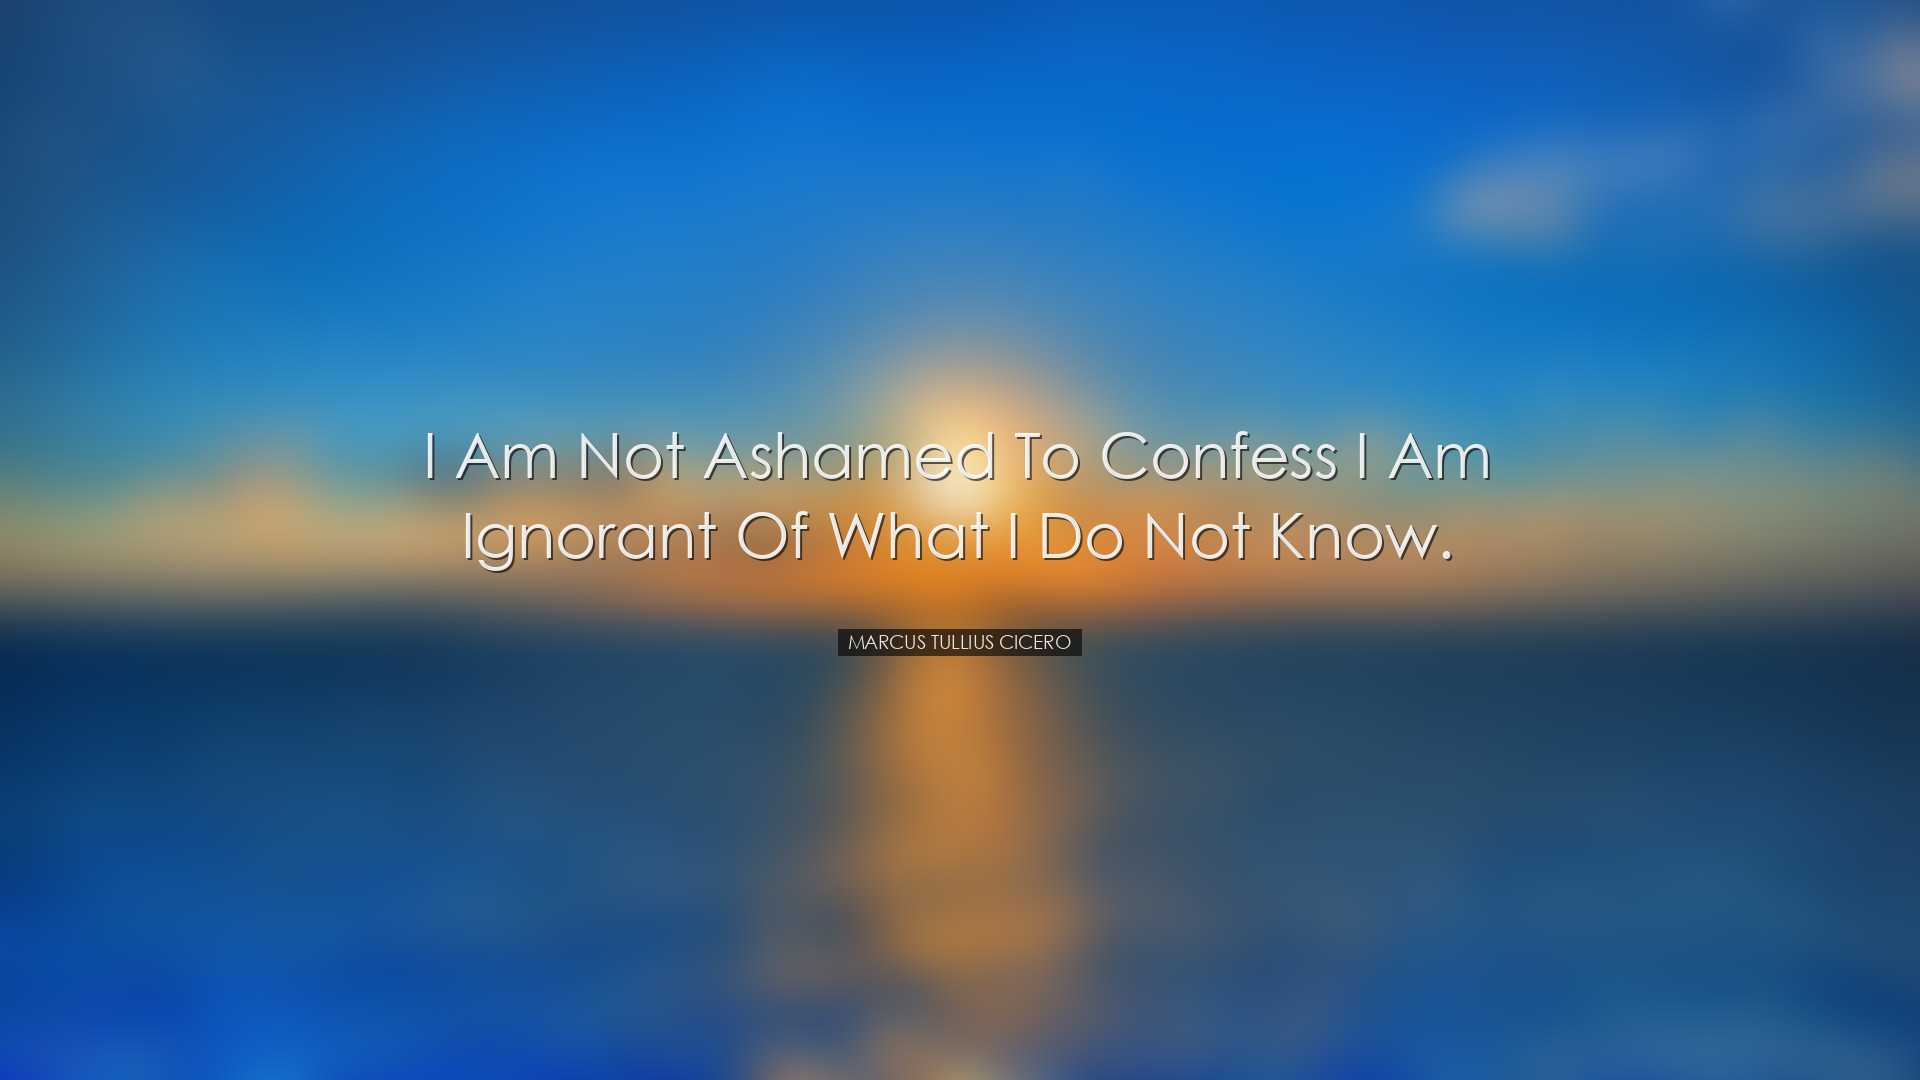 I am not ashamed to confess I am ignorant of what I do not know. -